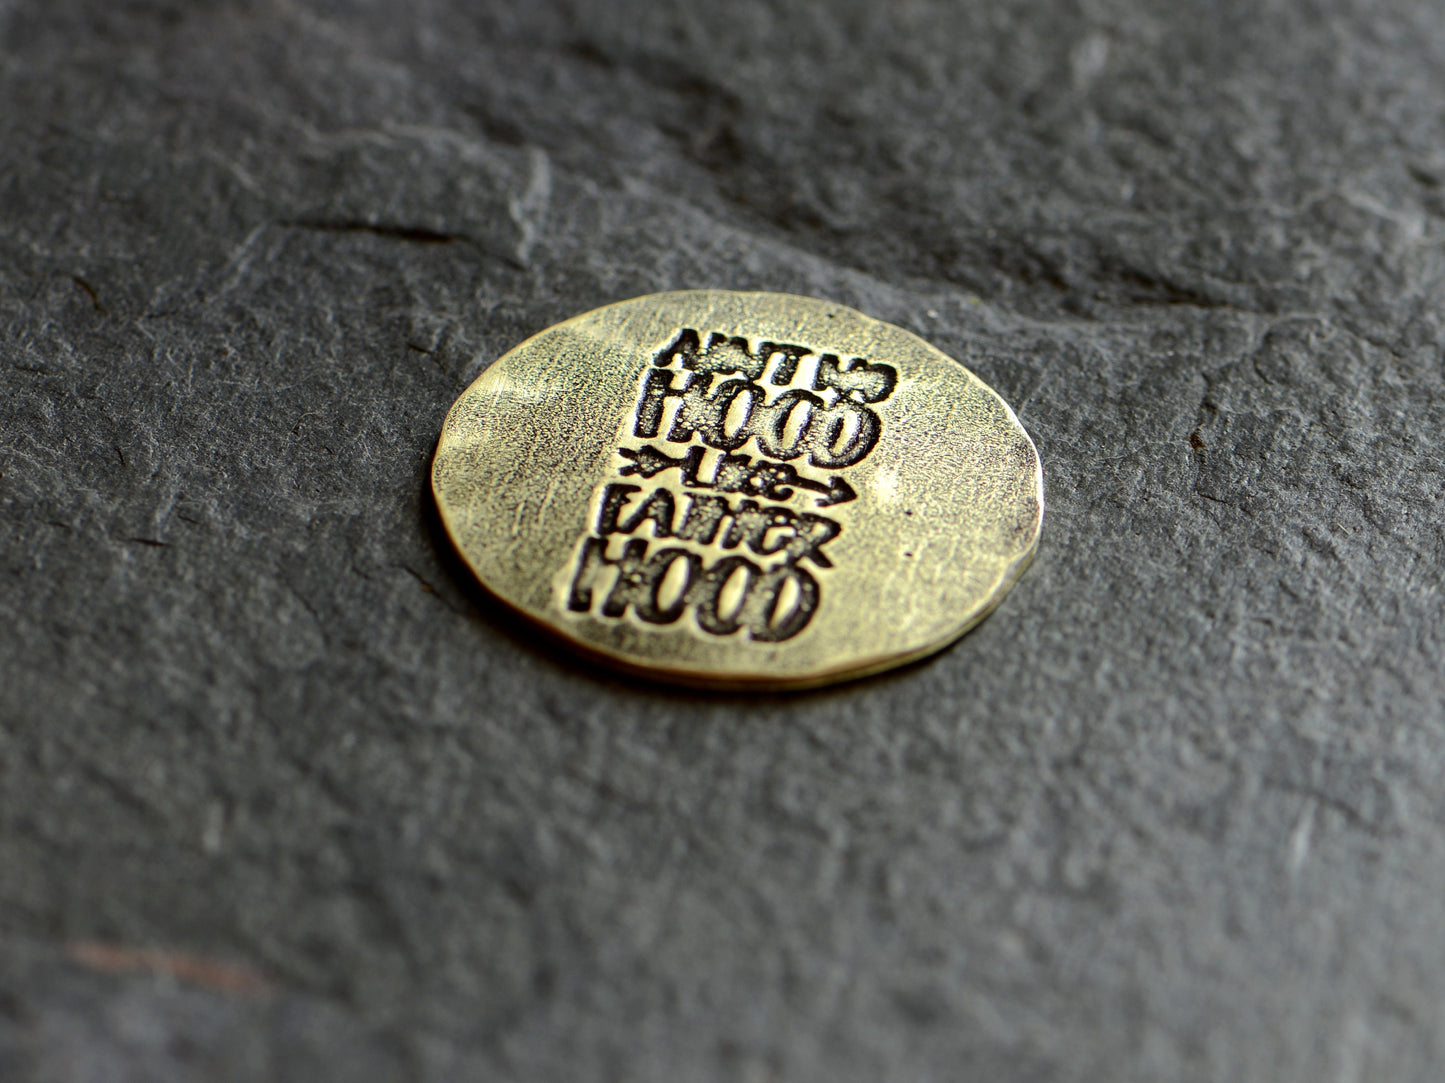 Golf ball marker stamped with " Ain't no hood like fatherhood" in brass